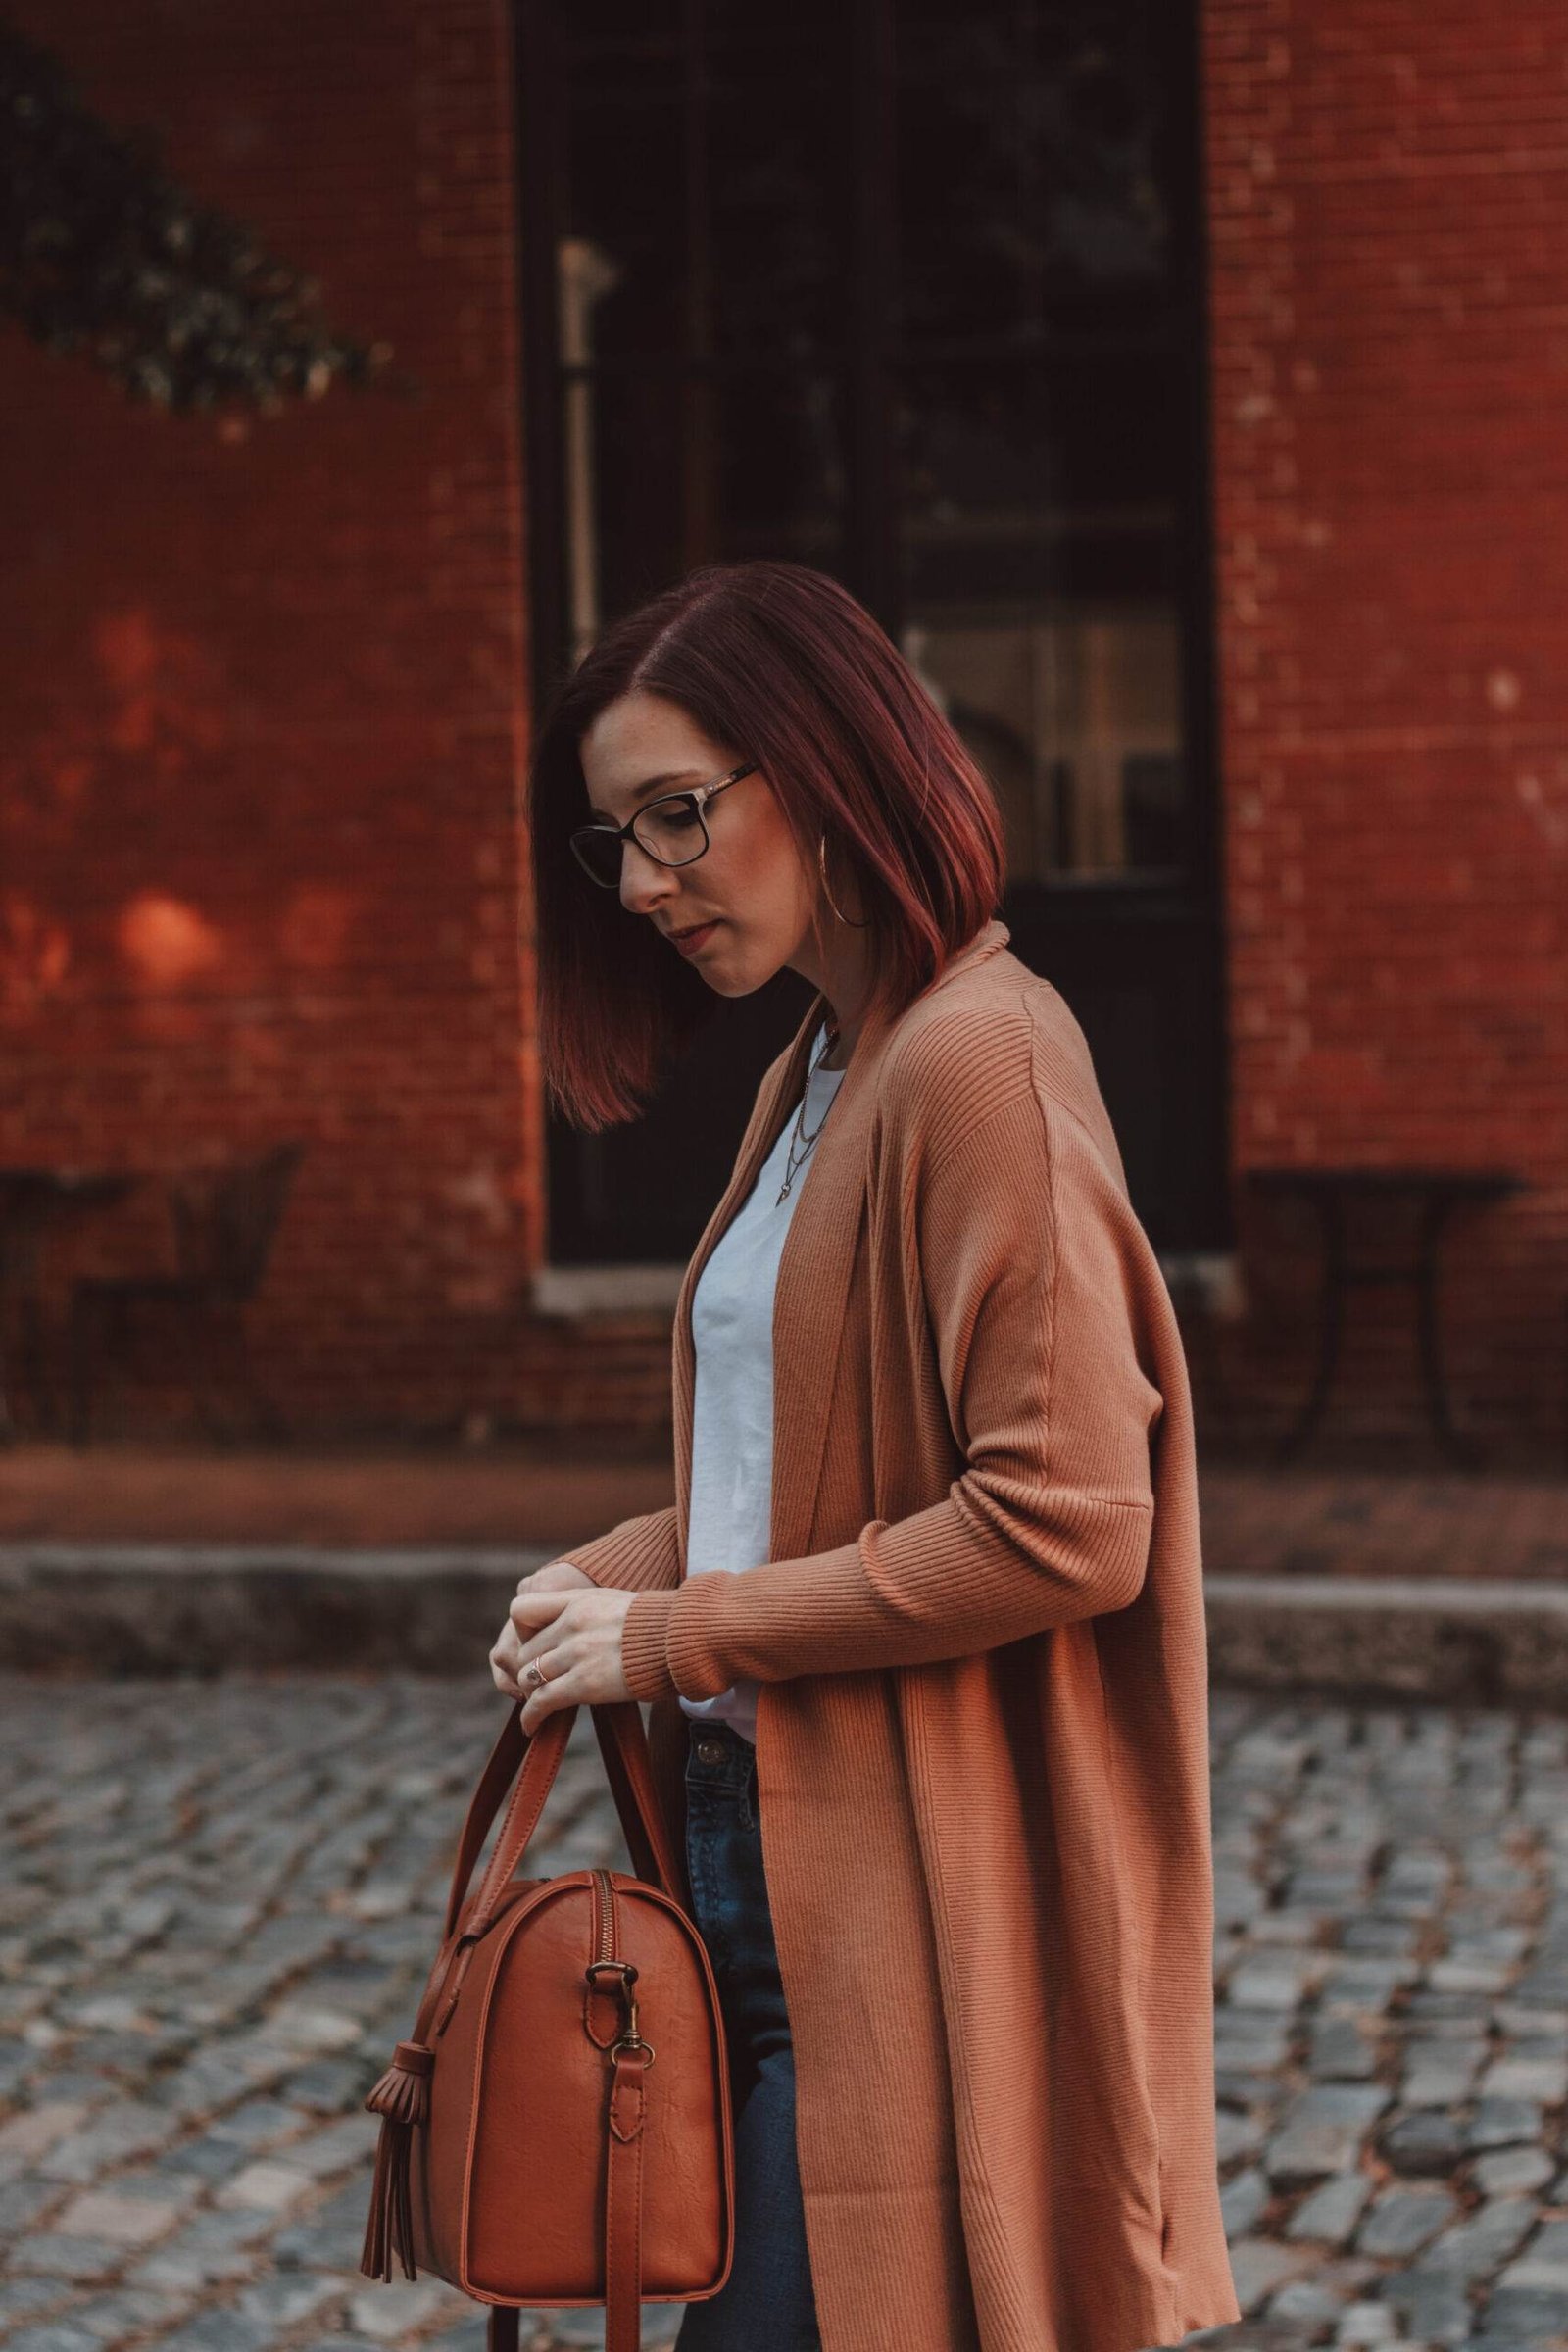 The Long Cardigan You NEED For Fall